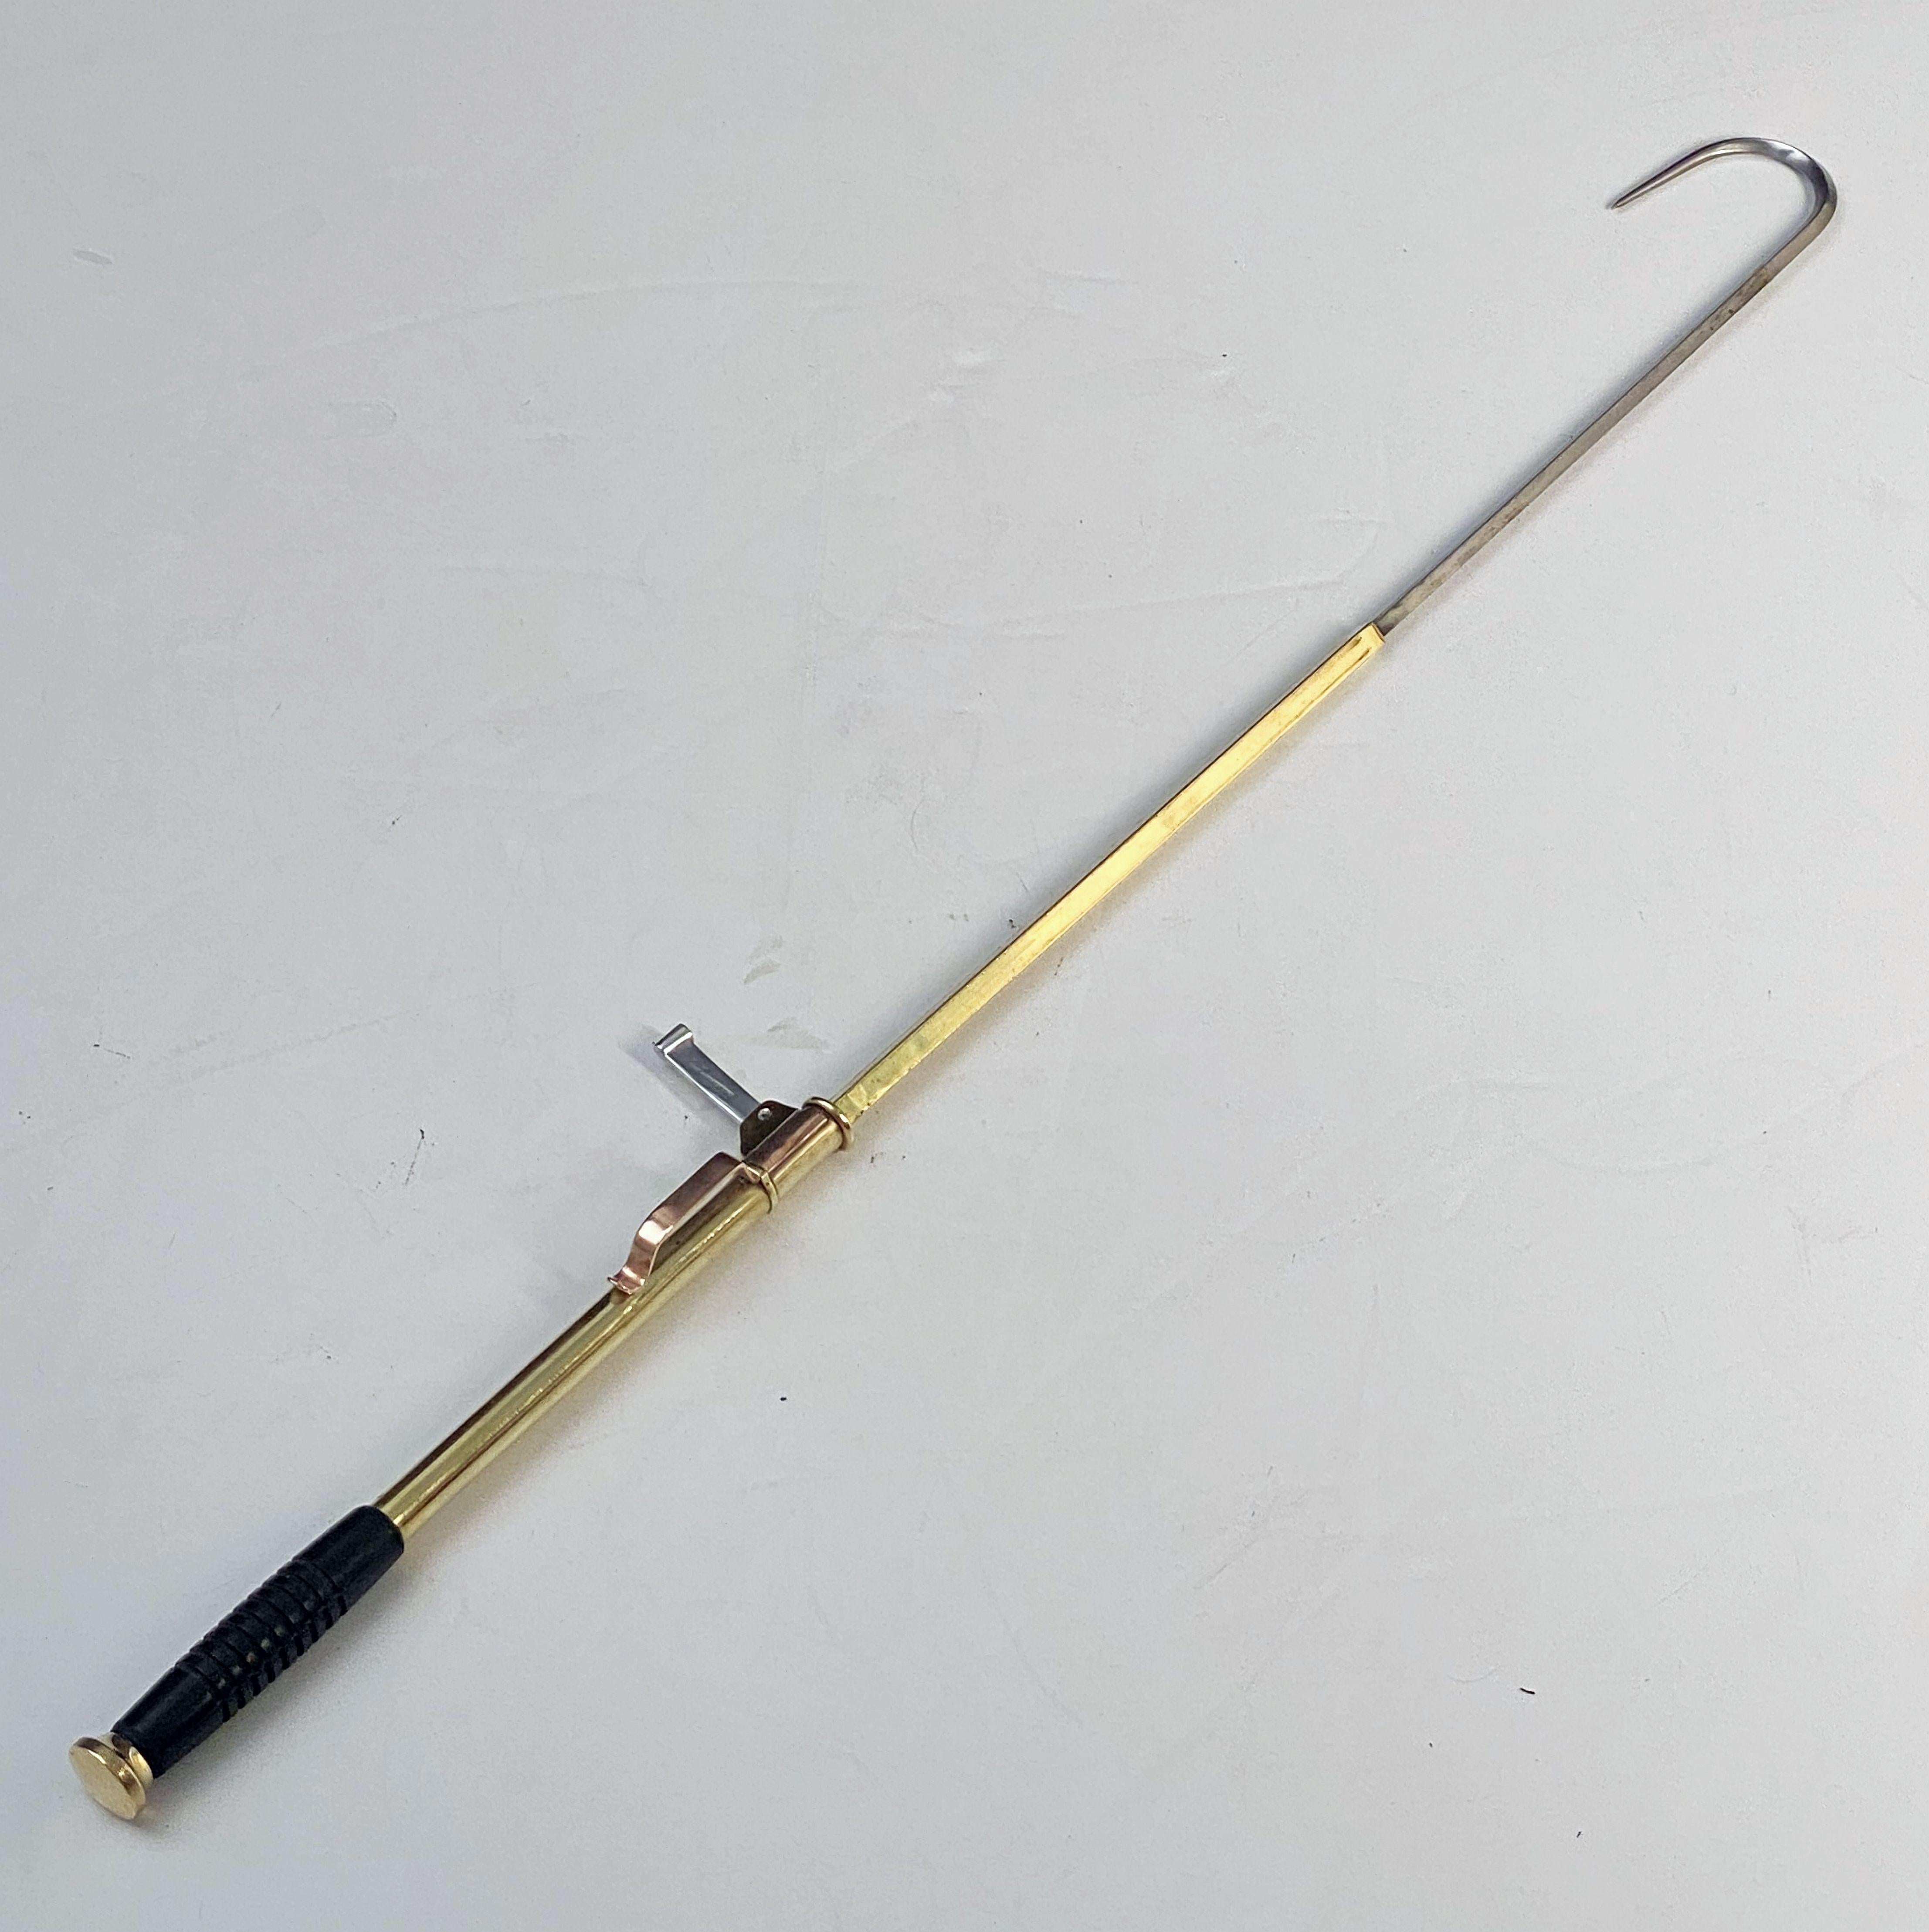 A fine English collapsible fishing or fisherman's gaff (hook) of brass, copper, and steel with a rubber grip handle, in working order.

Marked: Made in Great Britain

In fishing, a gaff is a pole with a sharp hook on the end that is used to stab